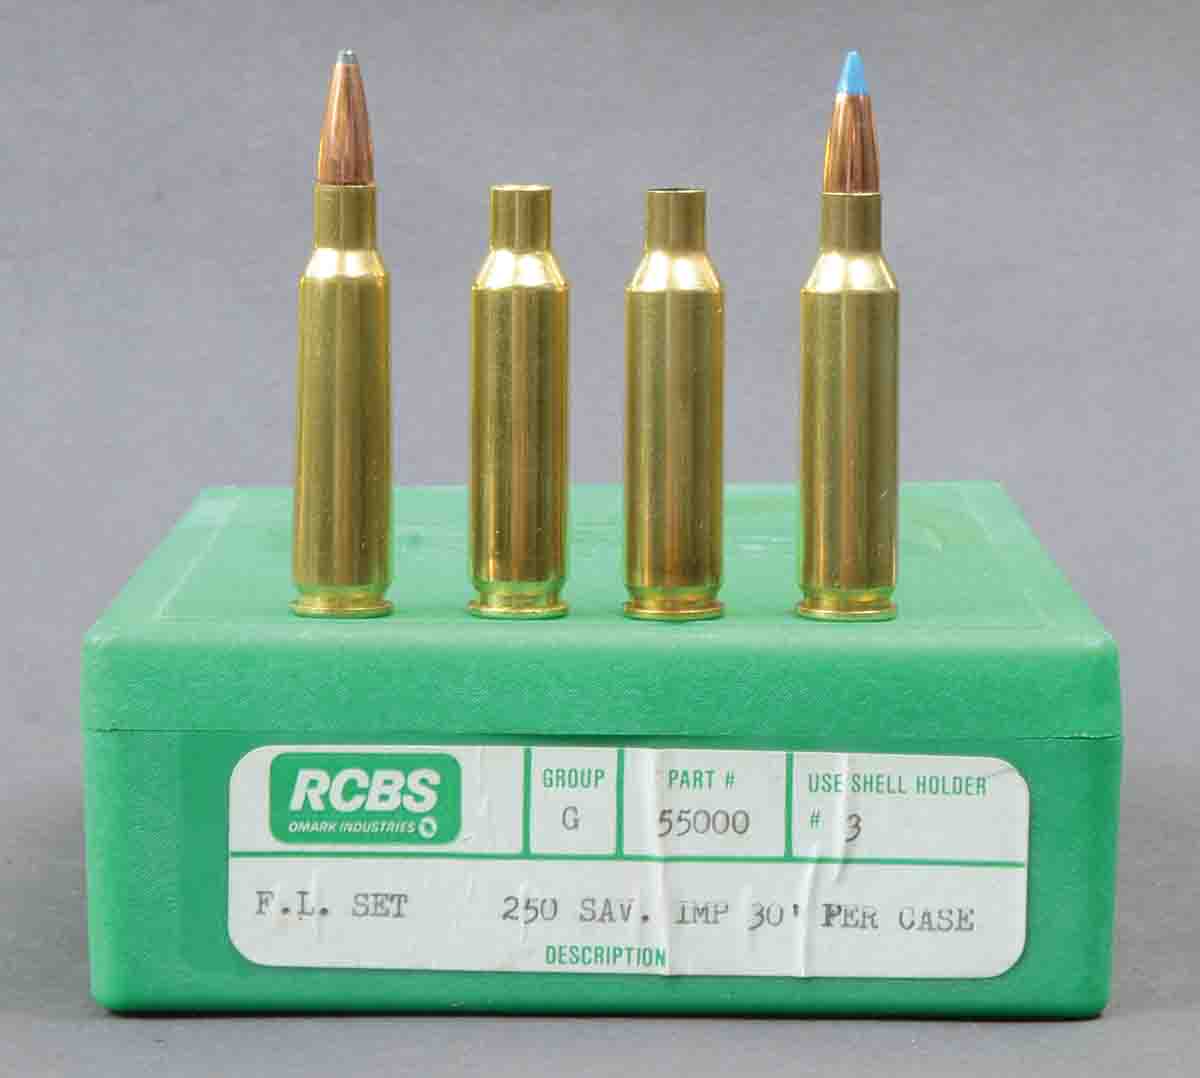 Cases have traditionally been formed by firing .250 Savage loads in a .250 Improved chamber, but simply running the 6.5 Creedmoor case through the .250 Improved full-length resizing die works well and eliminates the need for fireforming. Headspacing of cases formed from the Creedmoor was perfect for Layne’s rifle, but since the .250 Improved is a wildcat without standardized case dimensions, headspace with a simple neck-down may not be correct for other rifles. These cases include (left to right): a .250 Savage, .250 Savage after fireforming in an Improved chamber, 6.5 Creedmoor case necked down for .257-inch bullets and a loaded .250 Improved cartridge.